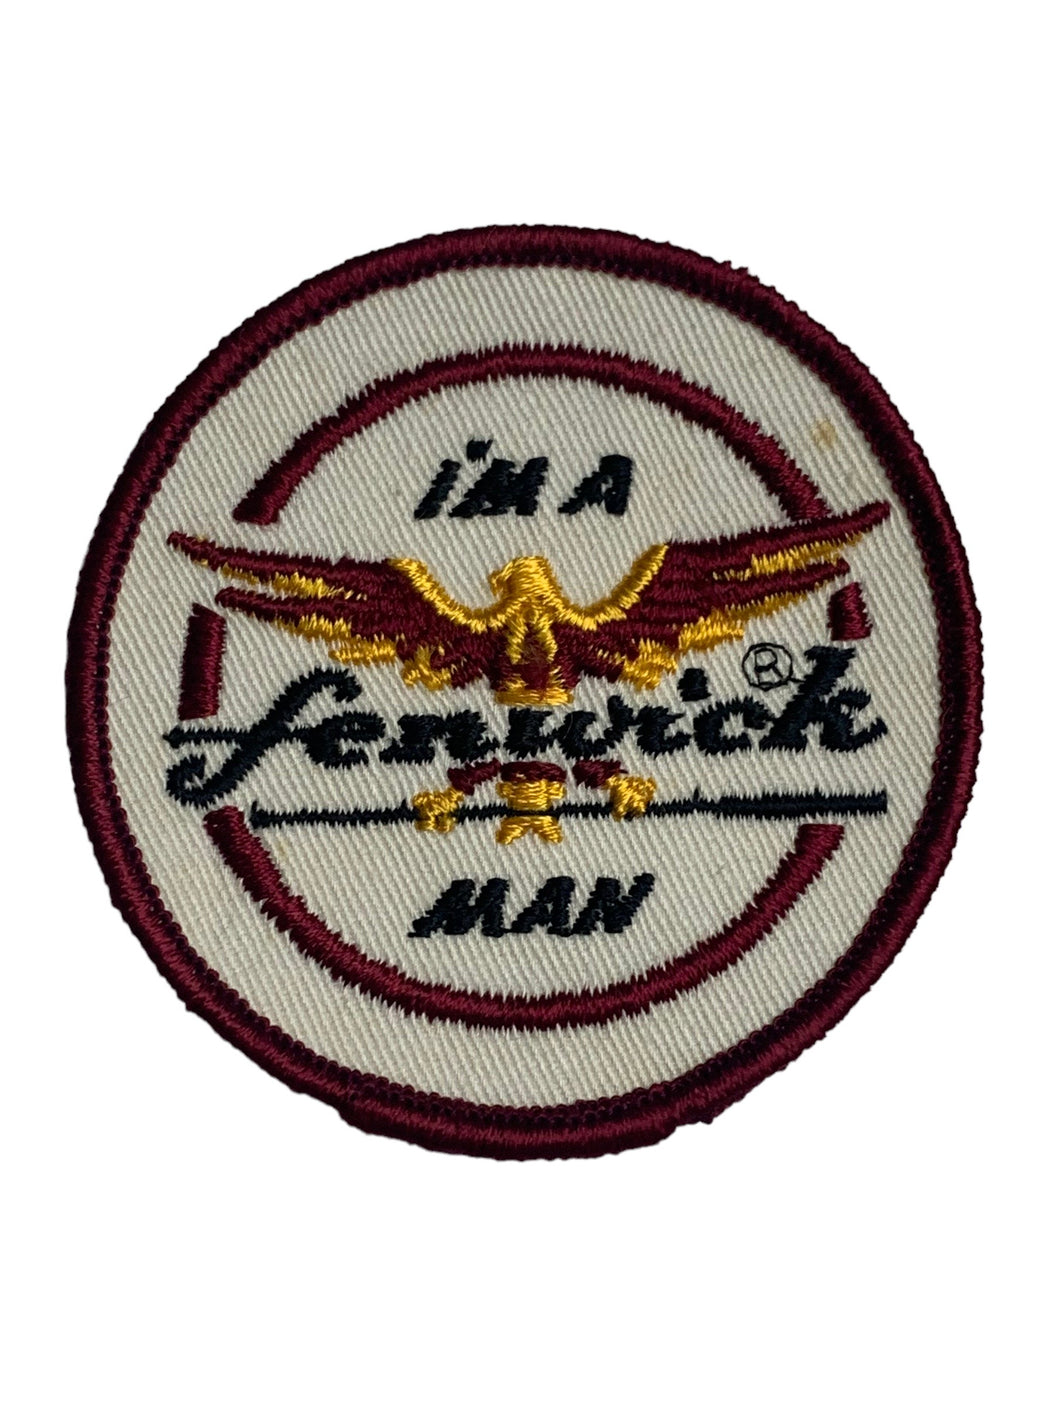 Fenwick Fishing Rods Vintage Collector Patch